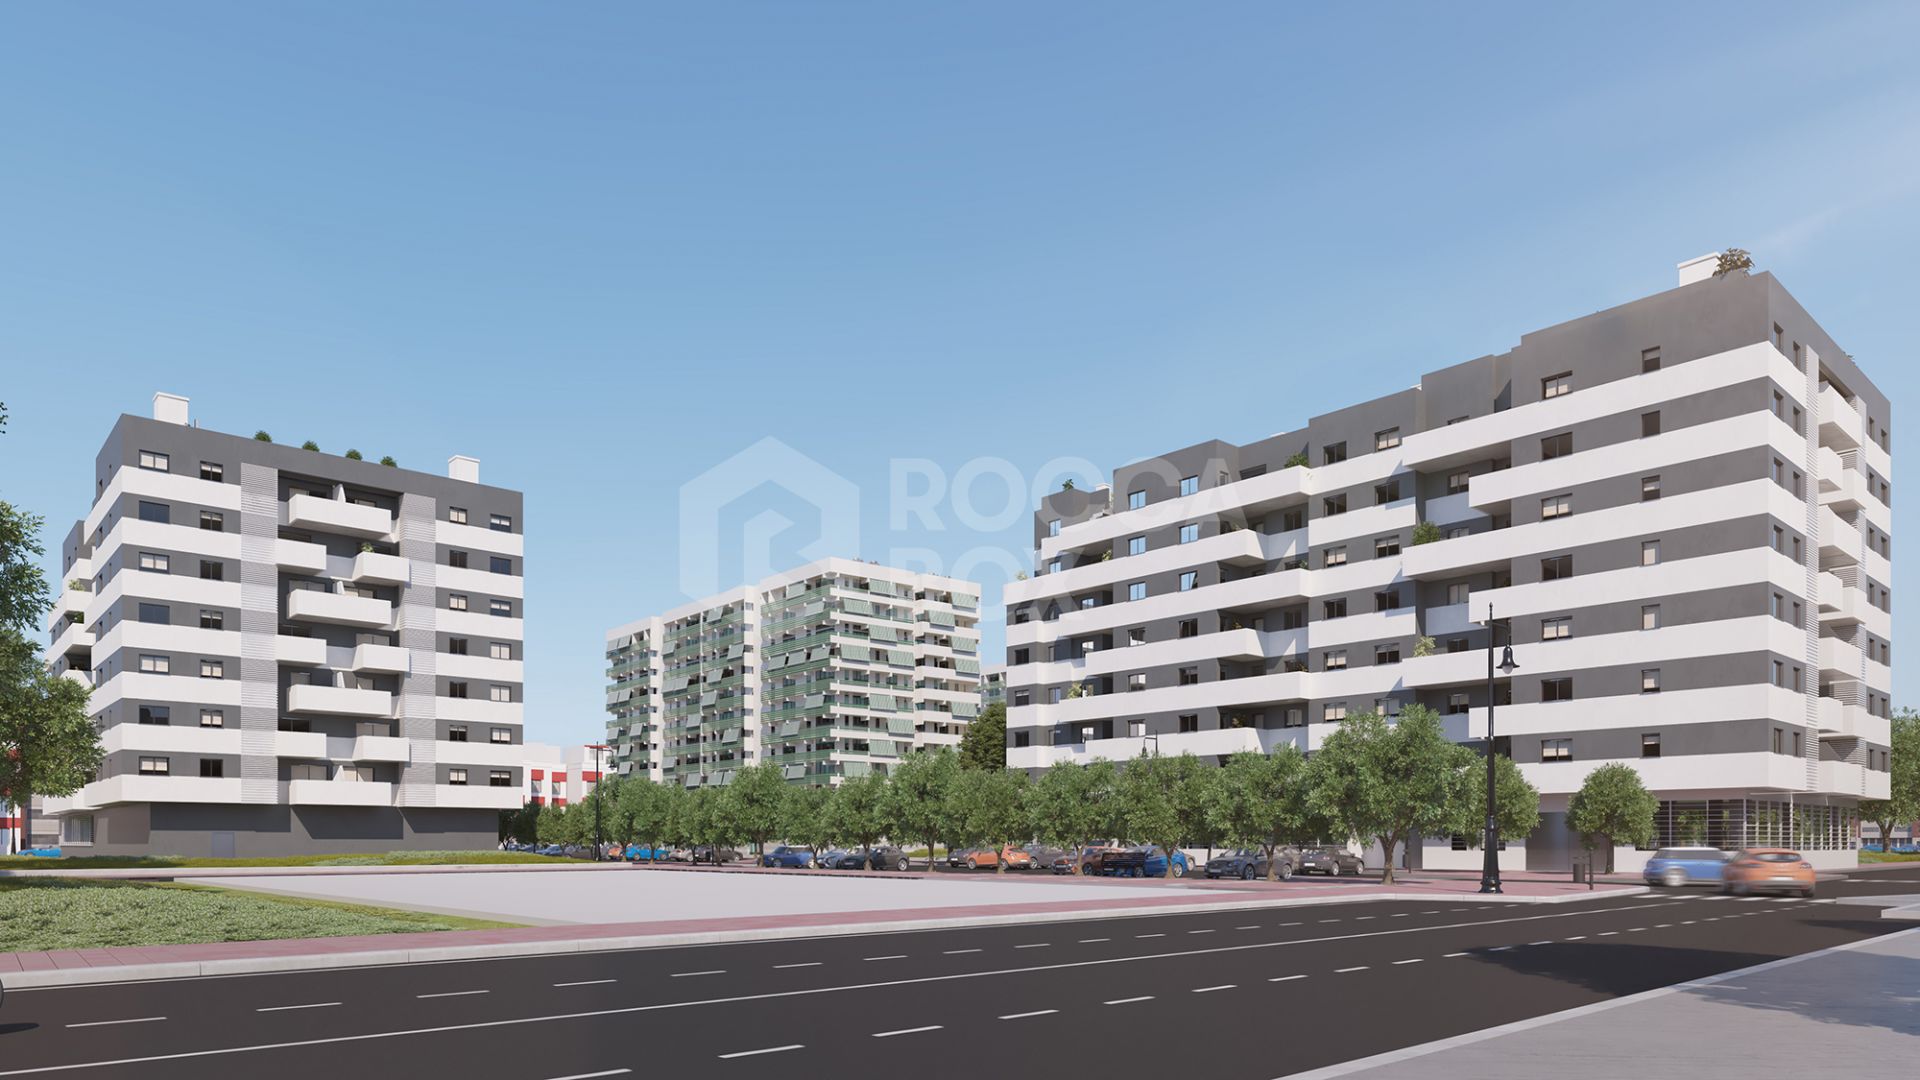 A new development located in the center of Estepona (Málaga), with 2, 3 and 4-bedroom homes, each with private garage space.